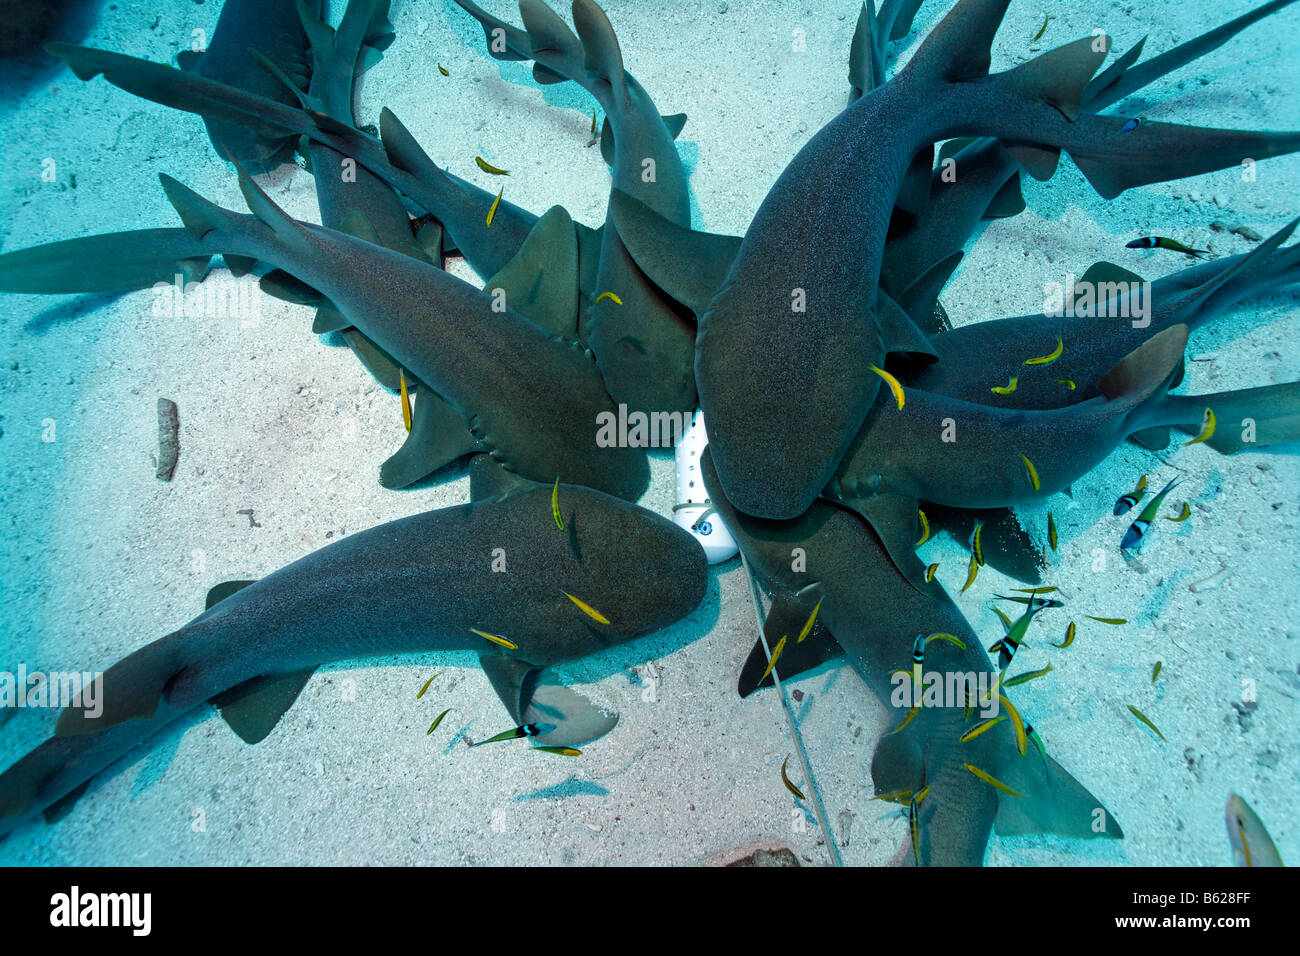 A school of Nurse Sharks (Ginglymostoma cirratum) attracted by a container of scent agents and bait lye on the sandy ocean floo Stock Photo